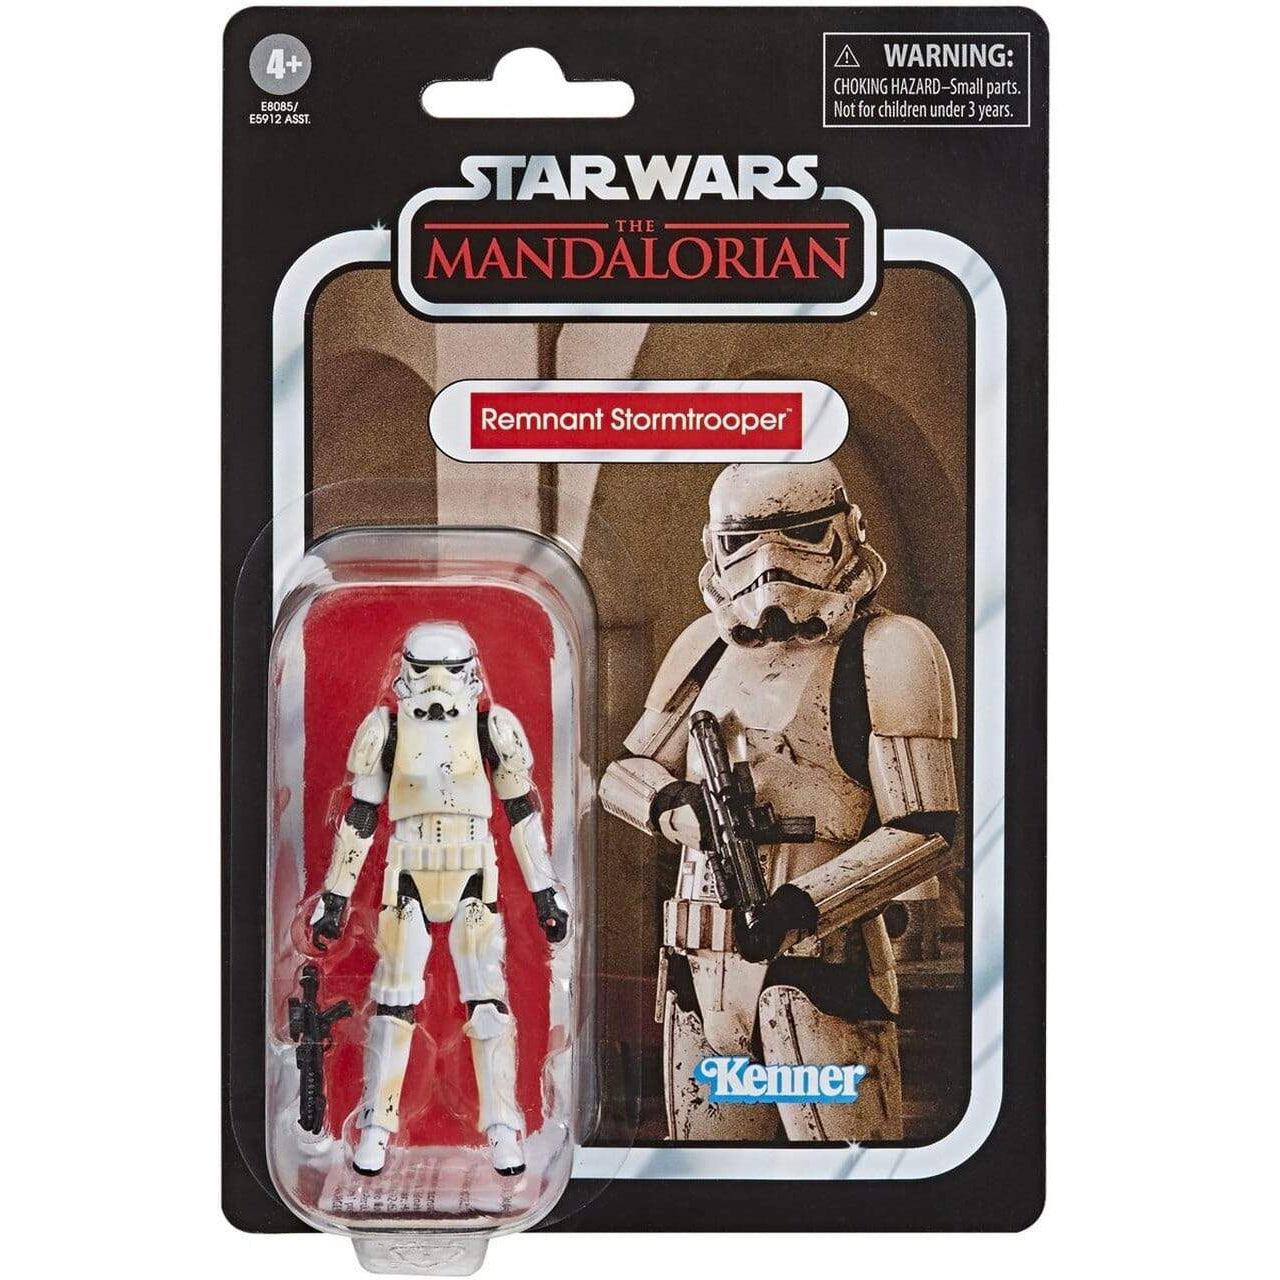 Hasbro-Star Wars: The Vintage Collection-E8085-Remnant Stormtrooper-Legacy Toys